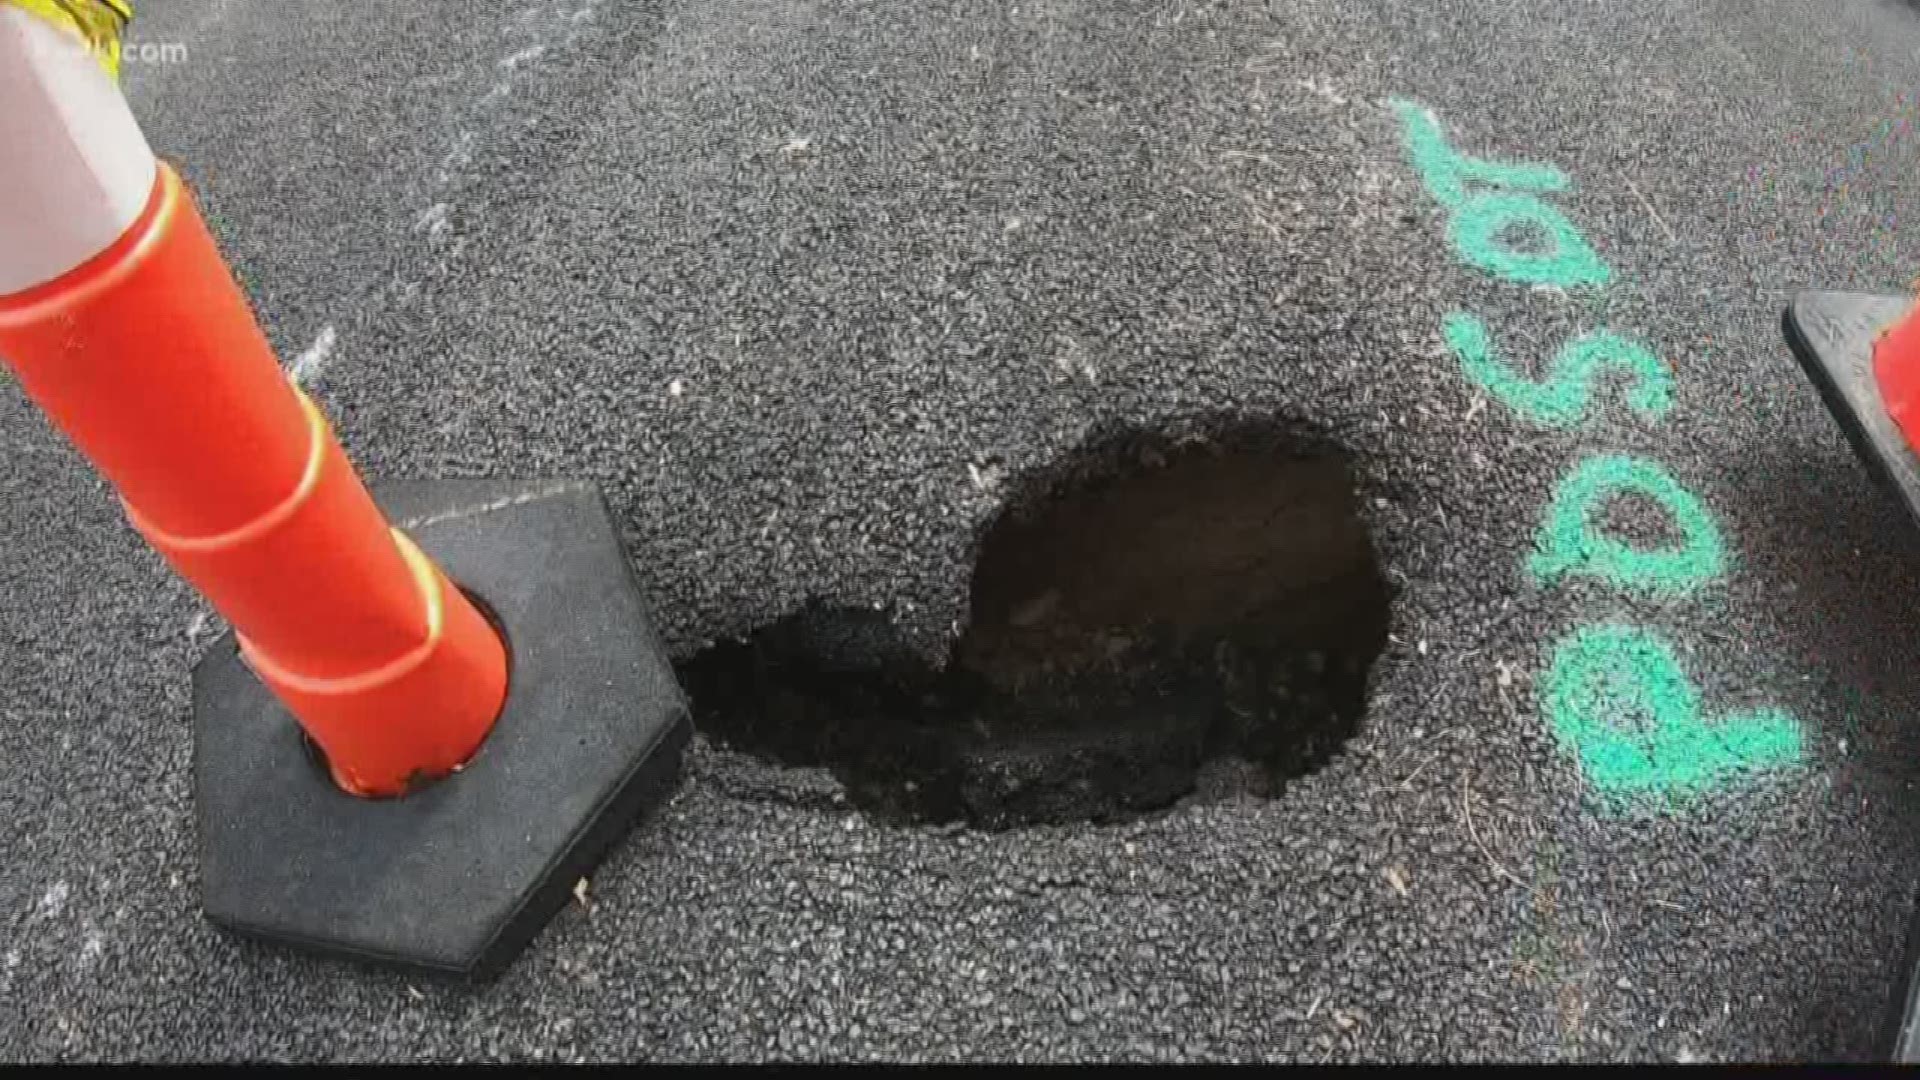 What started out as a slight dip in the road has since developed into a large and deep hole right in the middle of a busy residential street.